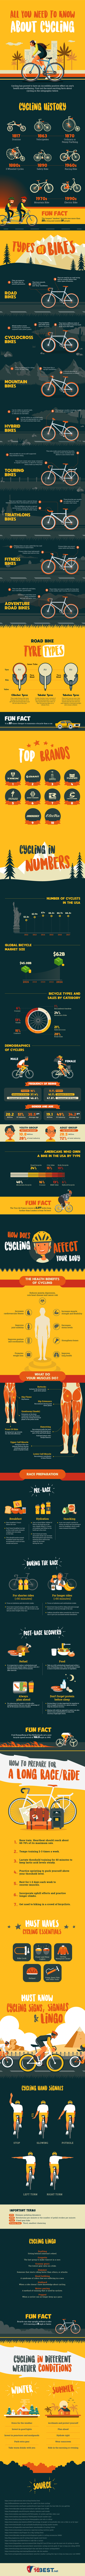 Infographic - All You Need To Know About Cycling